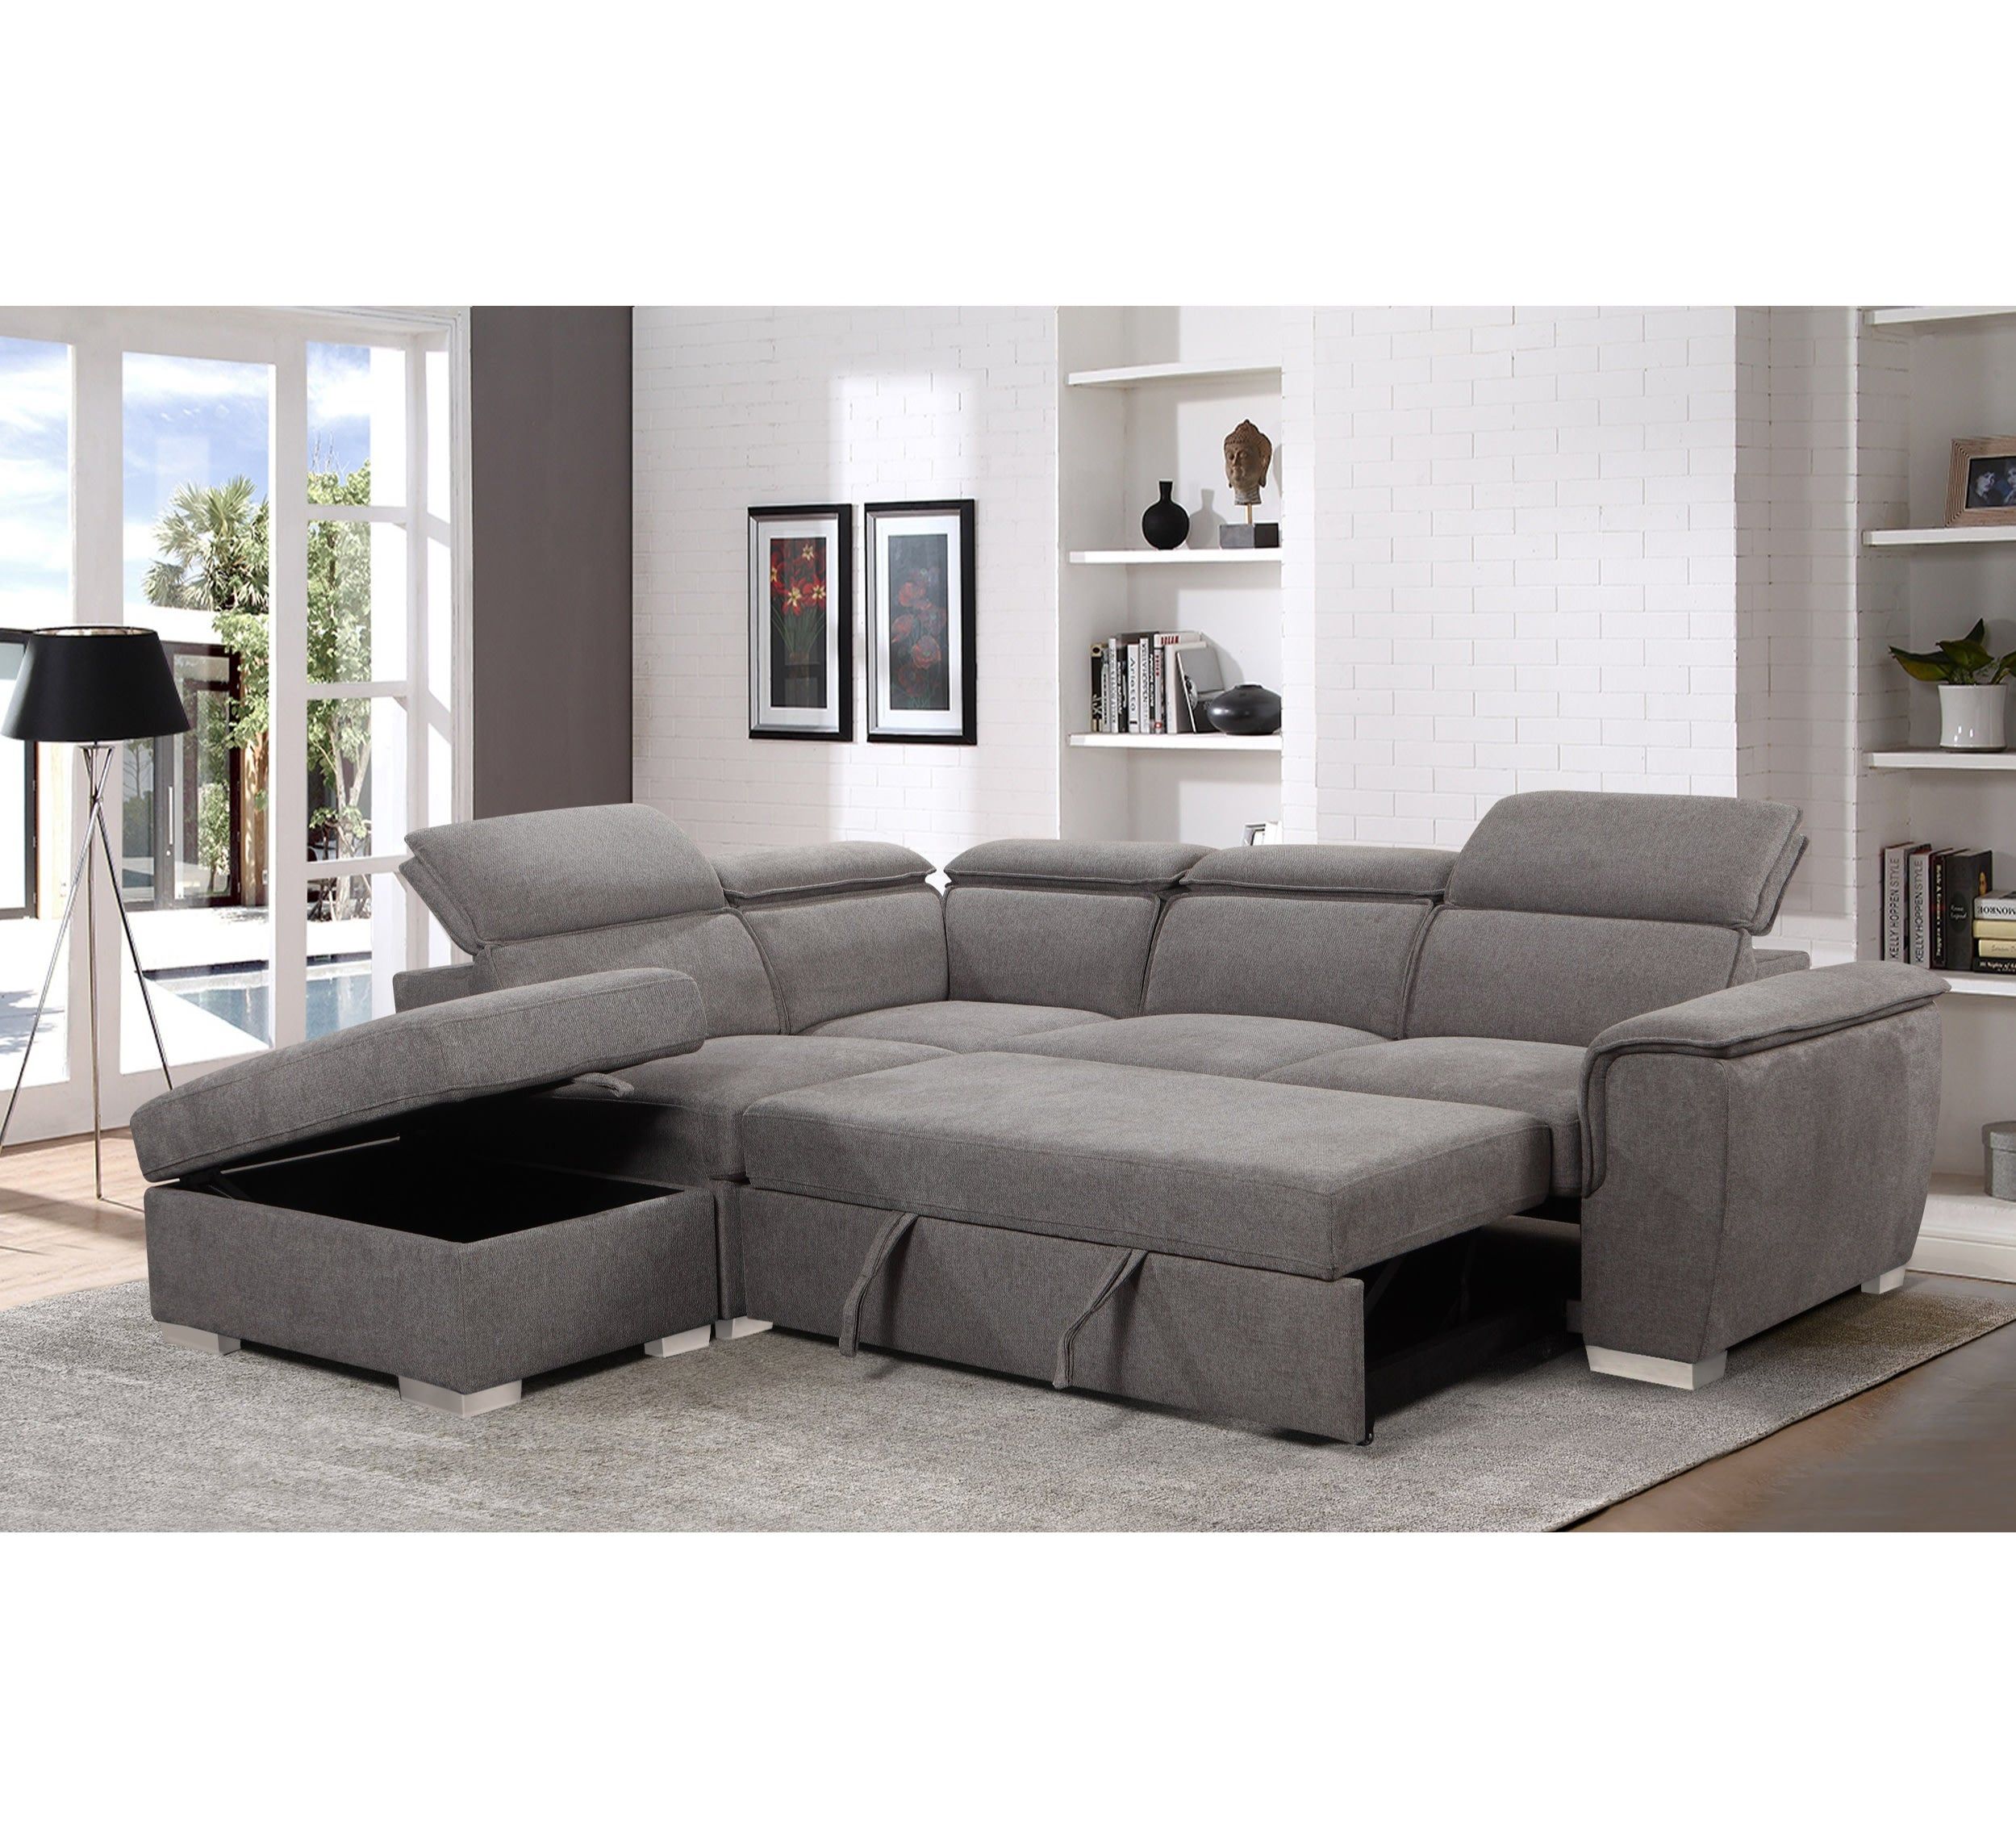 The Stylish Appeal of Contemporary Corner Sofas for Your Living Room